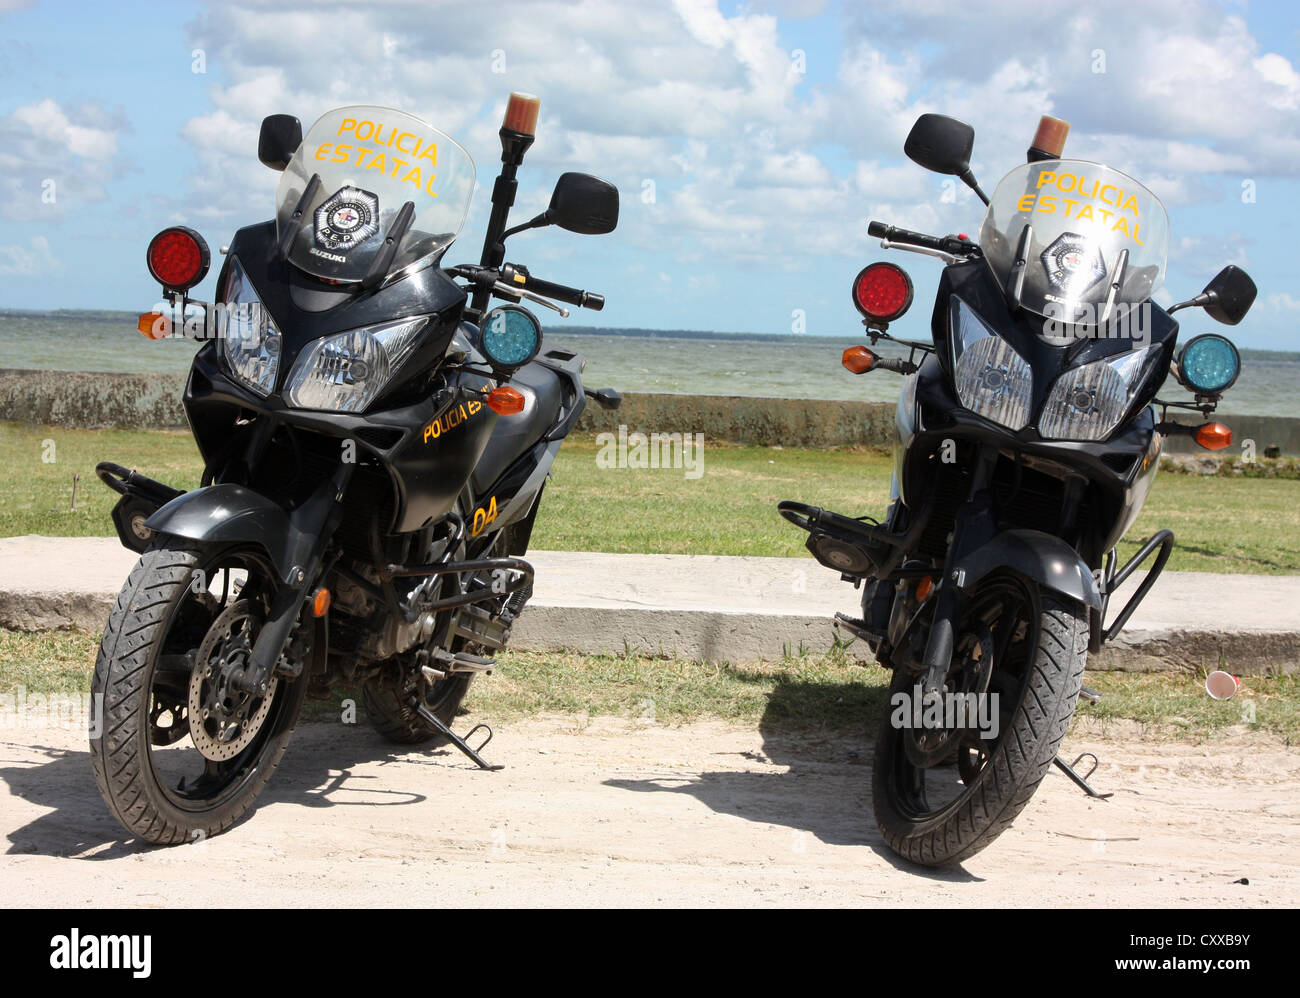 Mexican police motorcycles parked next to the Caribbean sea in Corozal, Belize Stock Photo